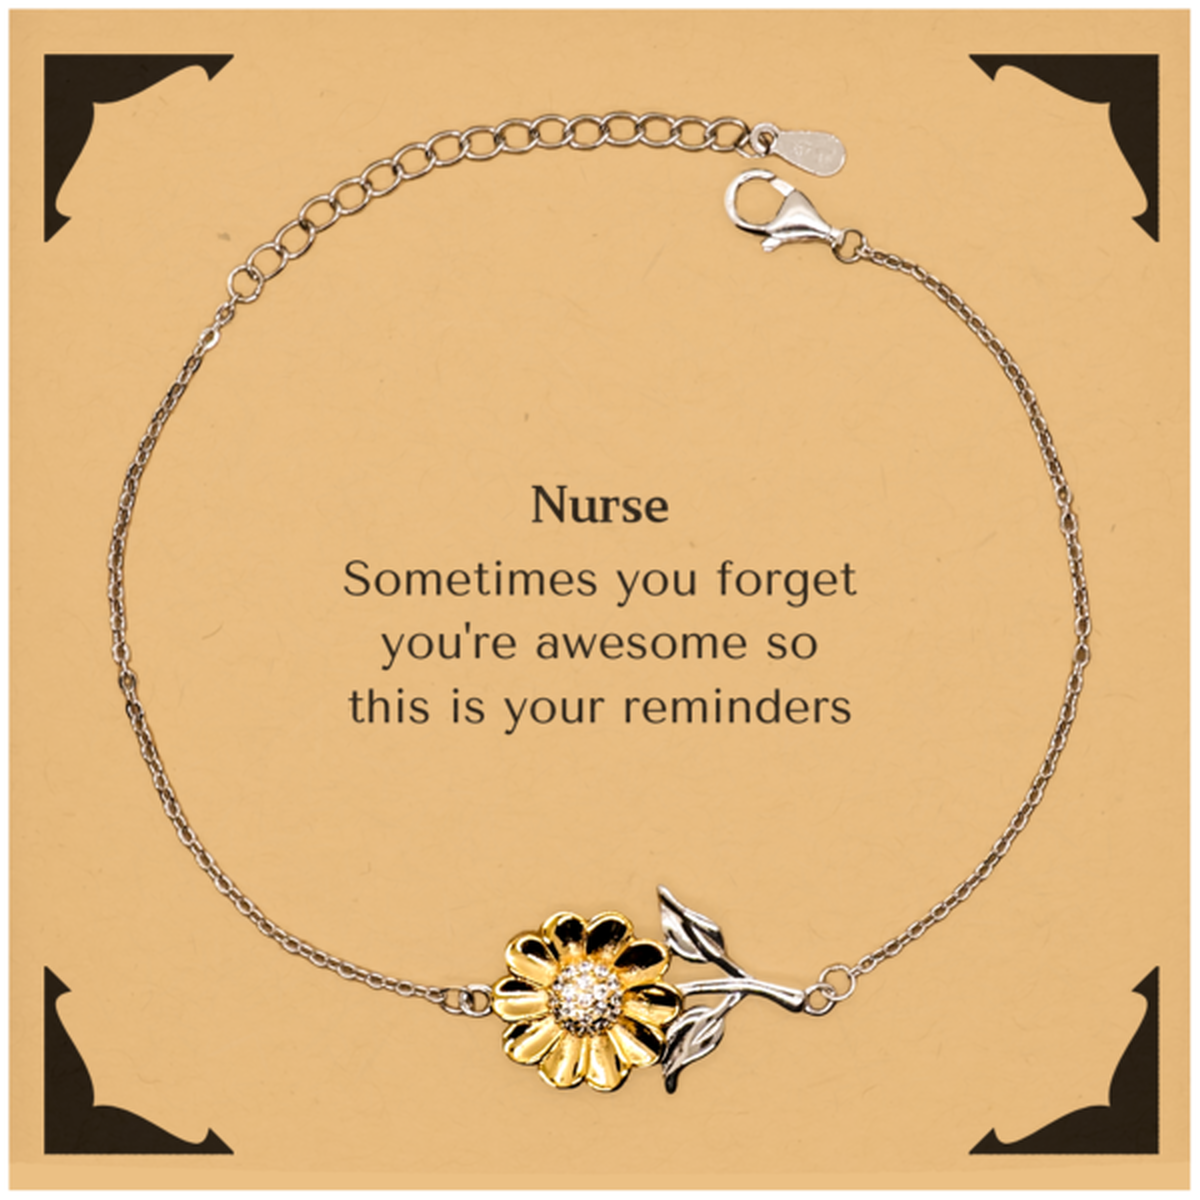 Sentimental Nurse Sunflower Bracelet, Nurse Sometimes you forget you're awesome so this is your reminders, Graduation Christmas Birthday Gifts for Nurse, Men, Women, Coworkers